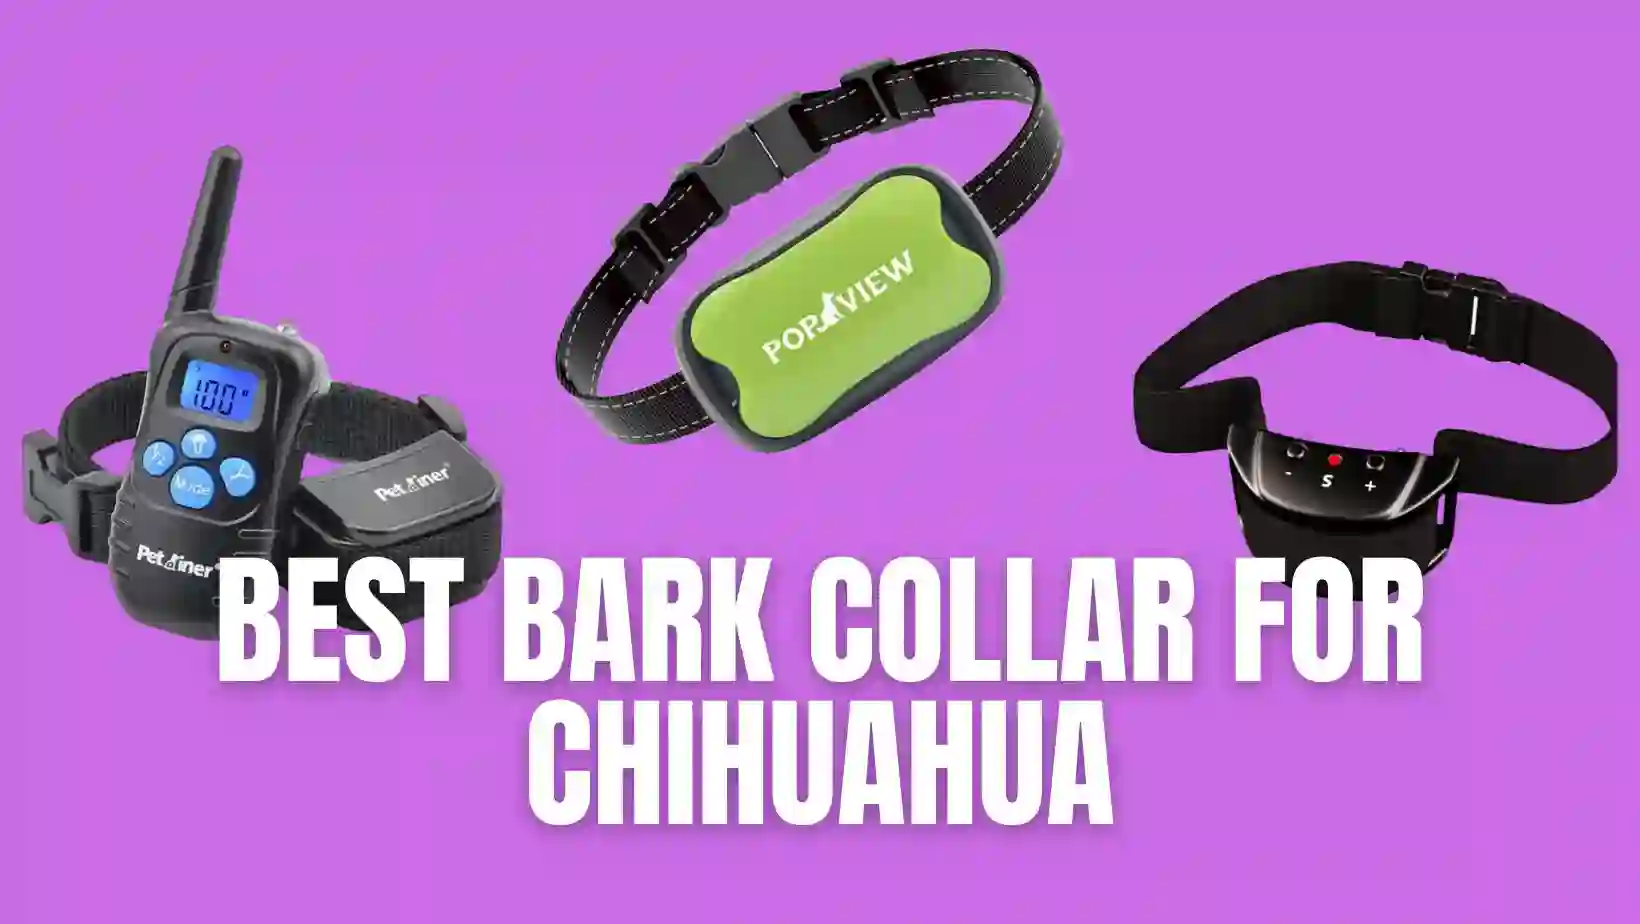 Best Bark Collar for Chihuahua